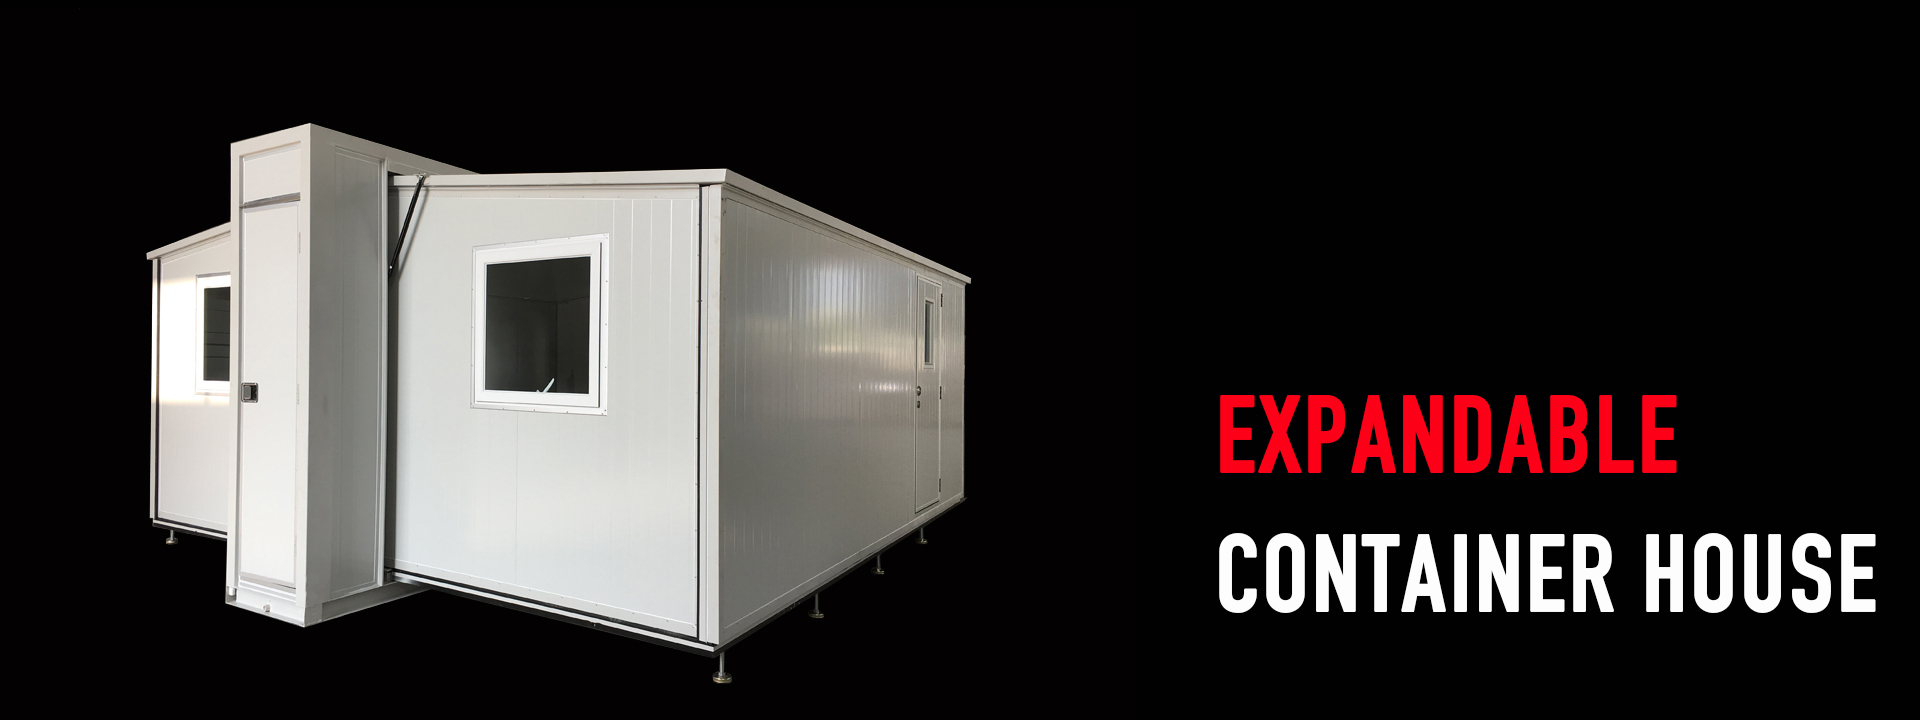 category-Best Expandable Container House Container Shelter in WELLCAMP-WELLCAMP, WELLCAMP prefab ho-2